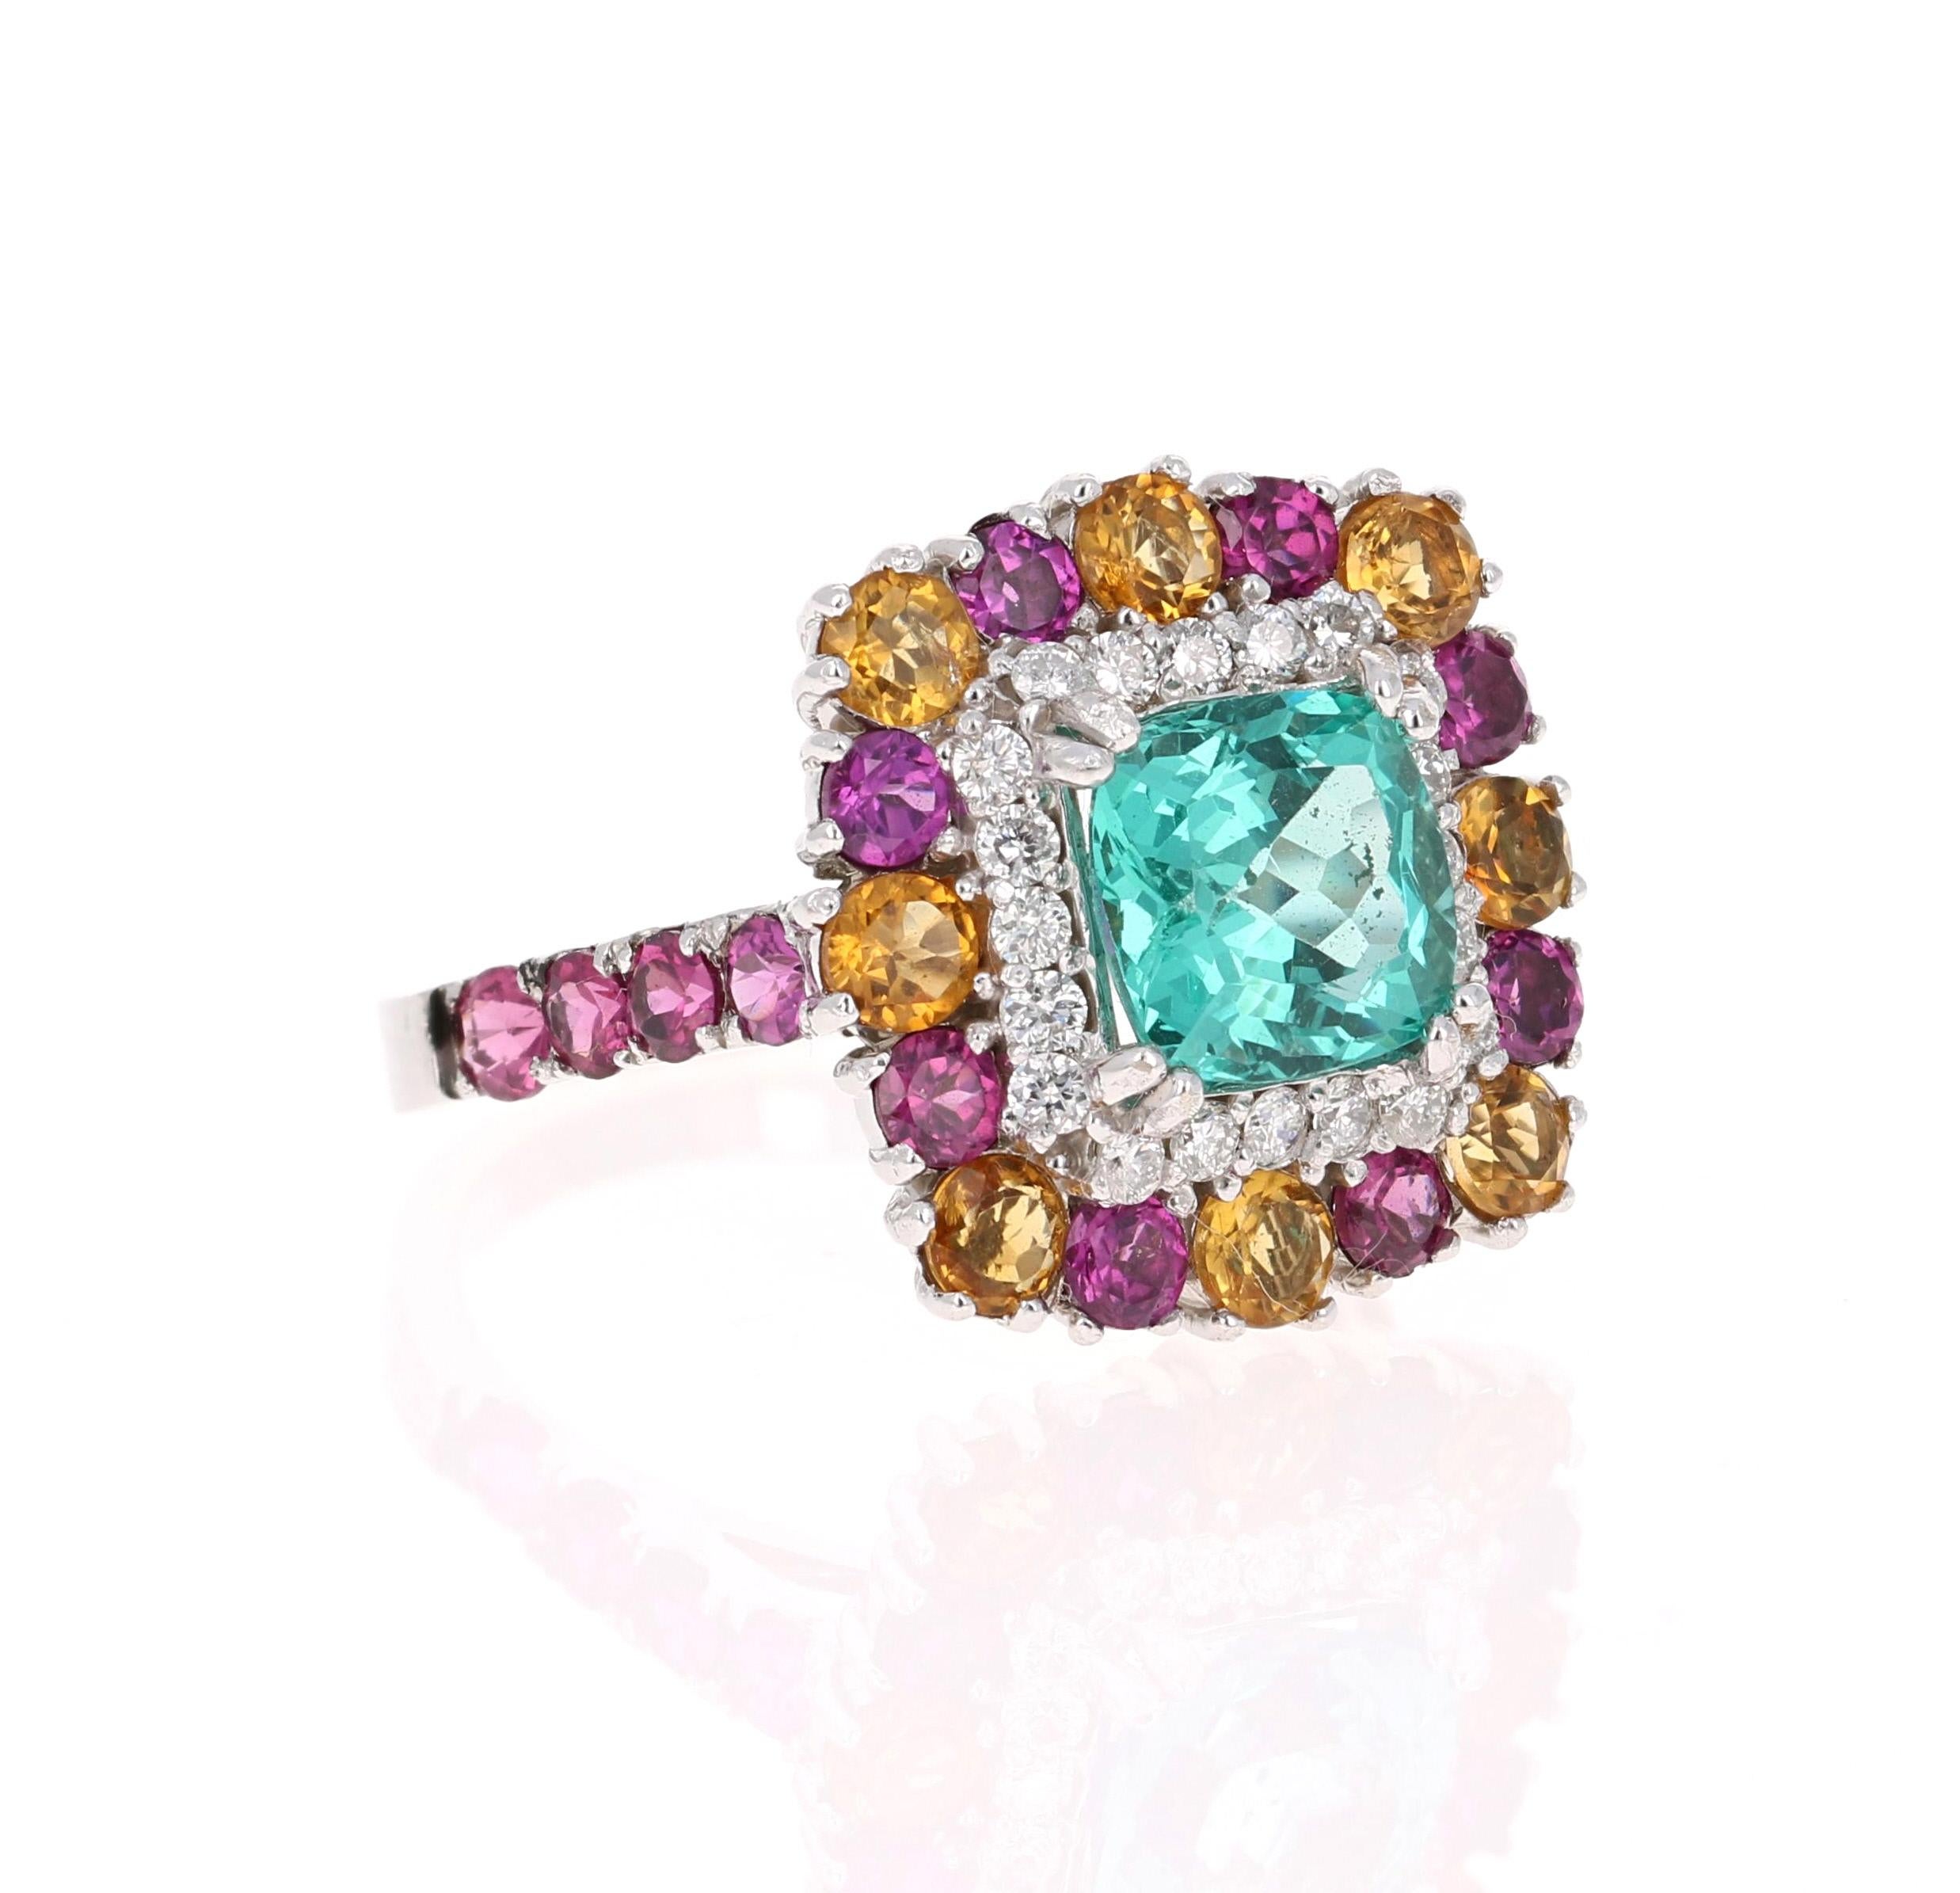 Gorgeous  Apatite, Purple Garnet, Citrine and Diamond Ring.  
This ring has a 2.07 Carat Cushion Cut Apatite in the center of the ring and is surrounded by 20 Round Cut Diamonds that weigh 0.33 carats (Clarity: SI, Color: F).  It is also embellished